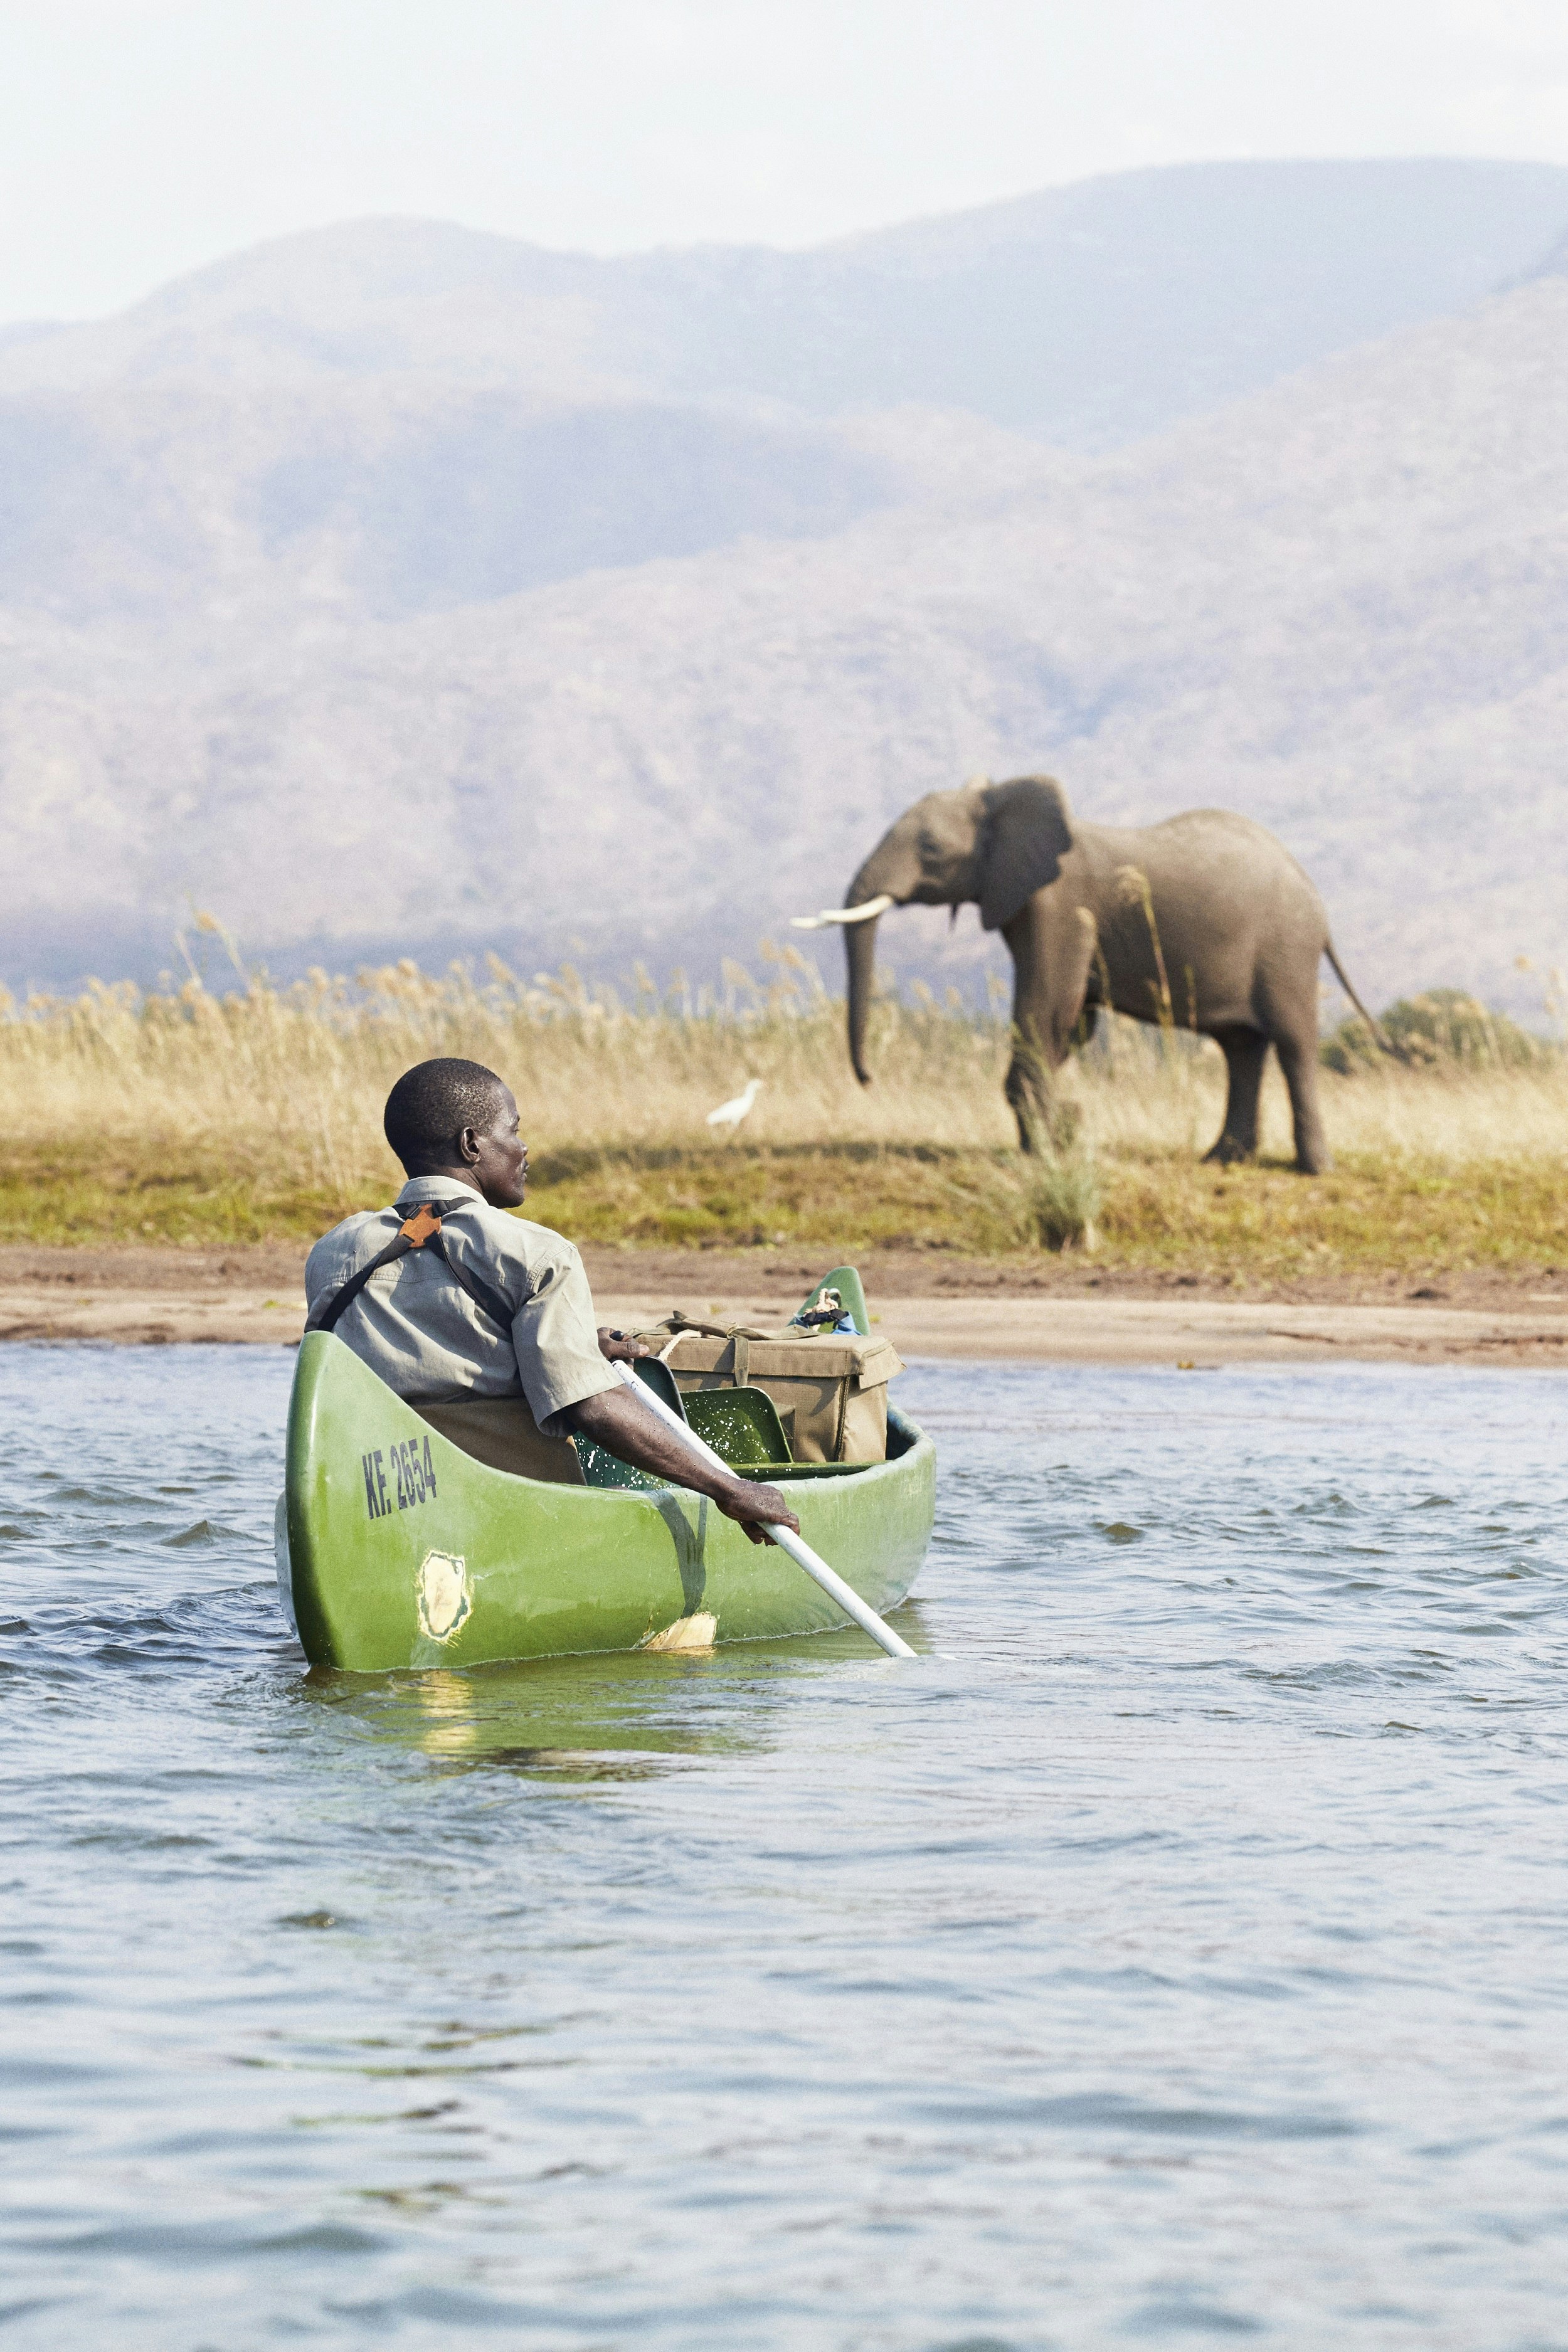 A safari guide in a canoe on the Zambezi River in Mana Pools National Park looks to the bank where a large elephant is standing.